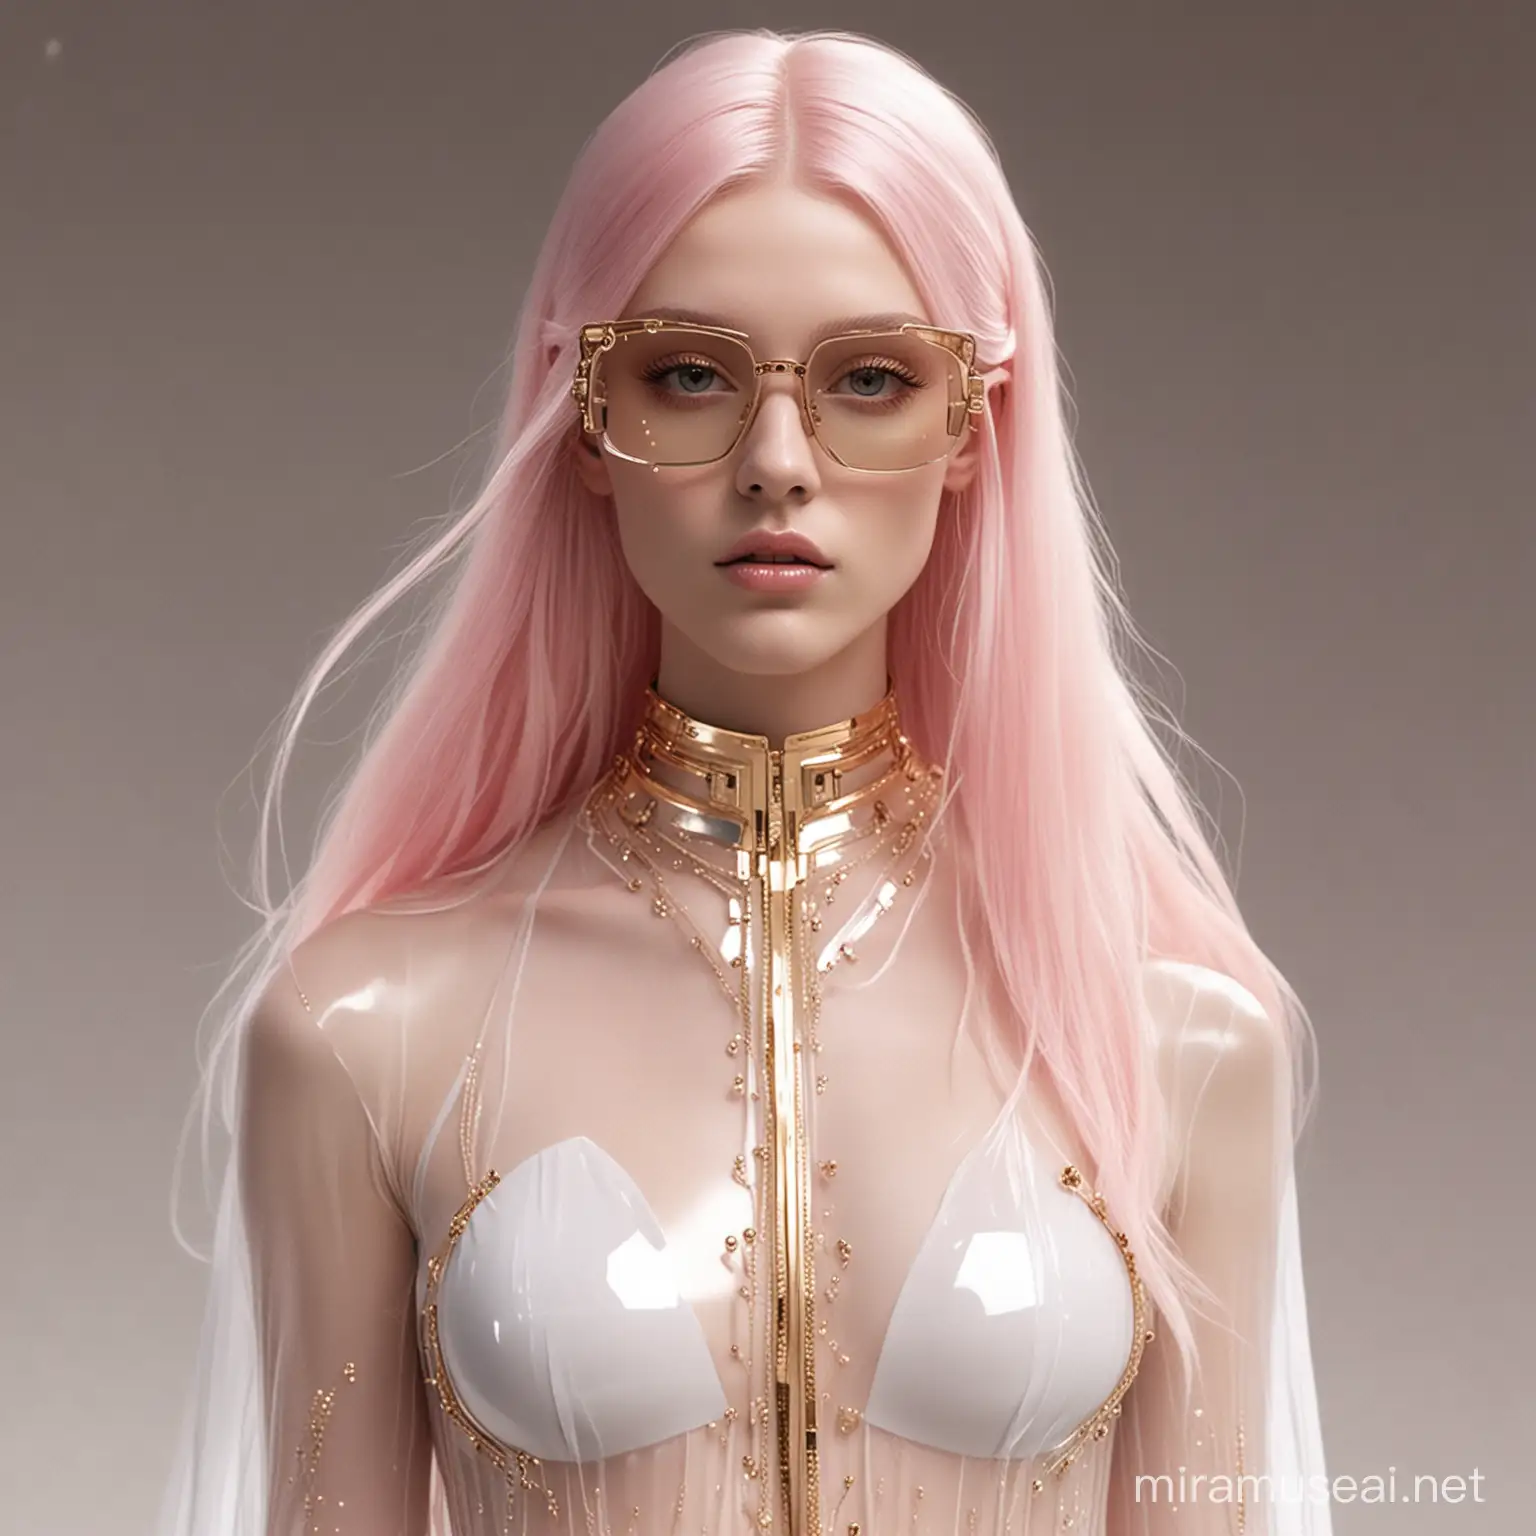 futuristic goddess, minimalistic, in floaty futuristic white and gold semitransparent clothing, ethereal long light pink hair, very edgy and beautiful, good design sense, in the style of Gucci, highly detailed, movie quality